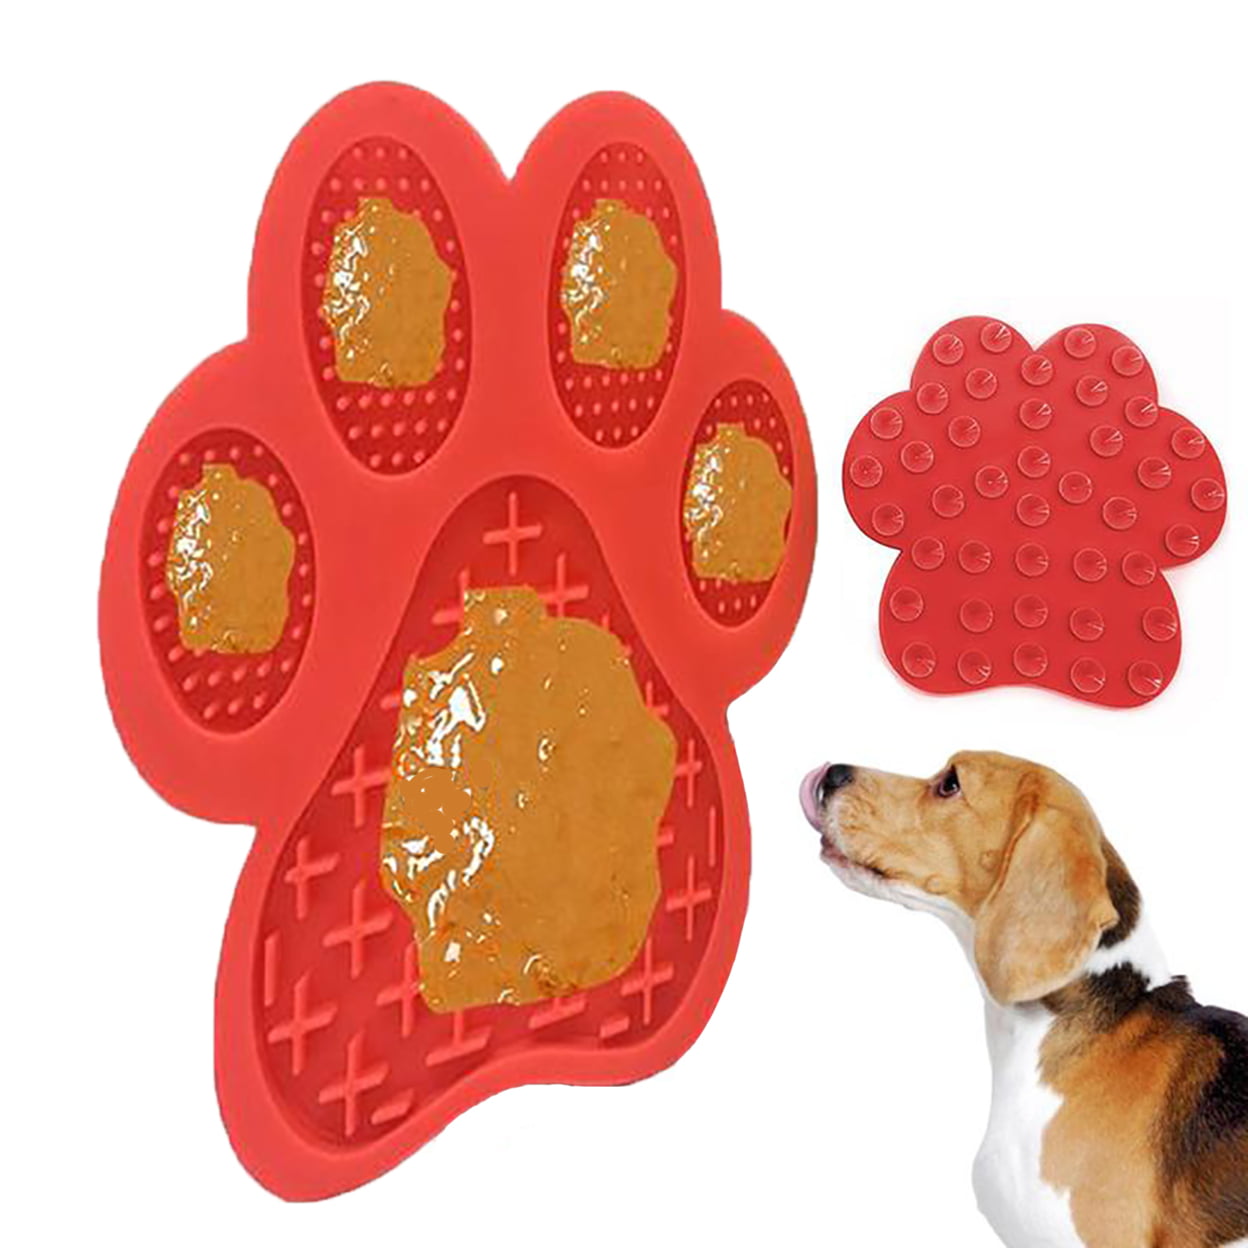 3P Experts 3PX-AHPAW-YLW-2PK Pet Ah Paw Calming Lick Pad, Yellow - Pack of 2